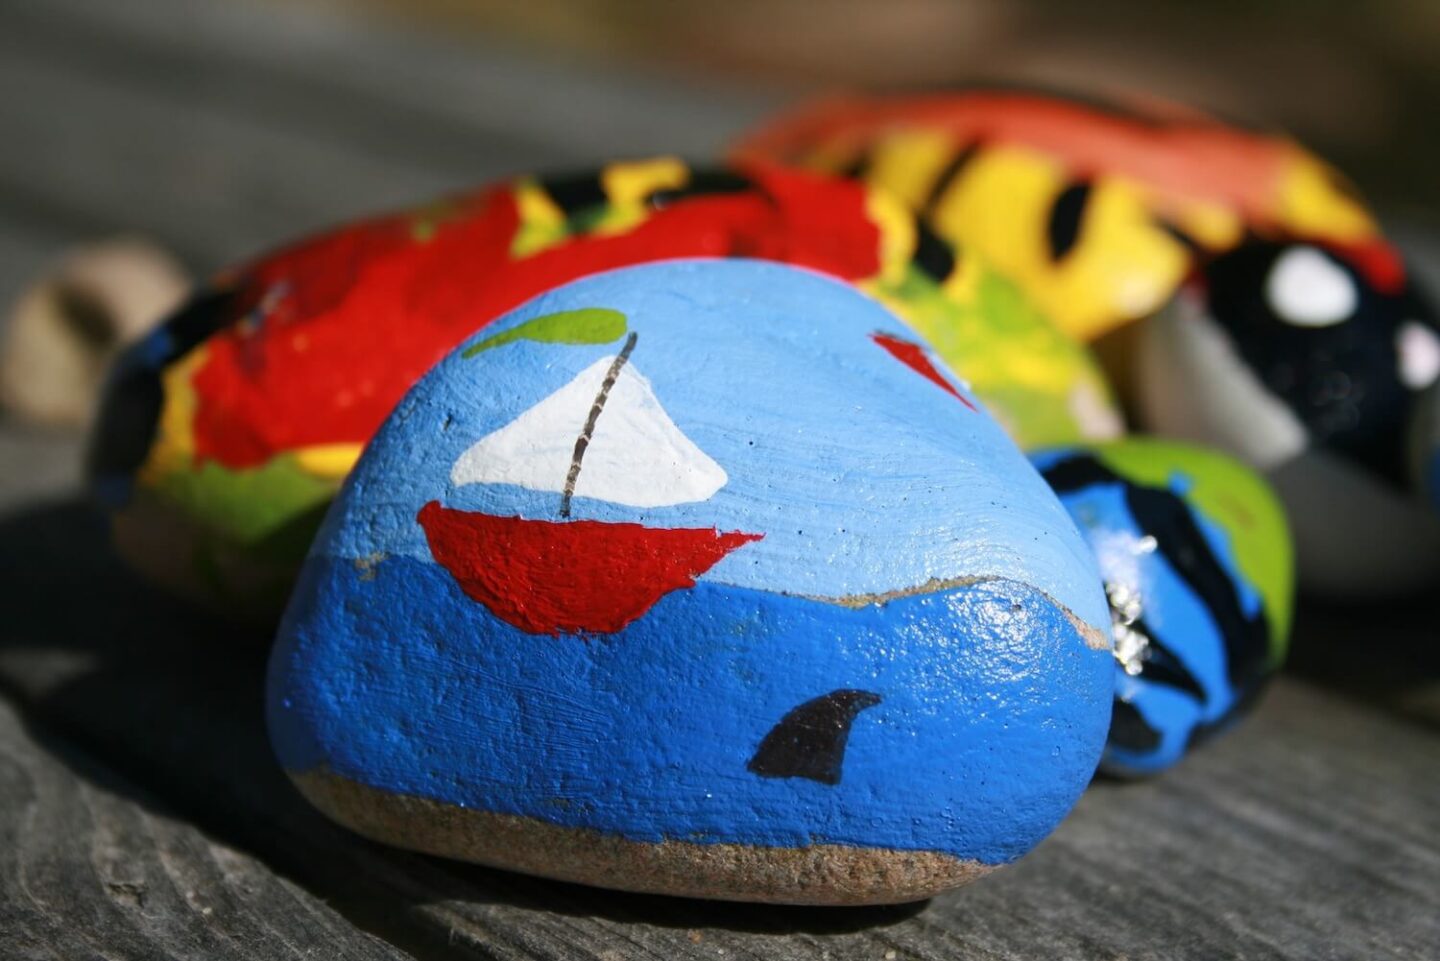 A pile of painted pebbles. The one closest to the camera depicts a sail boat on the ocean